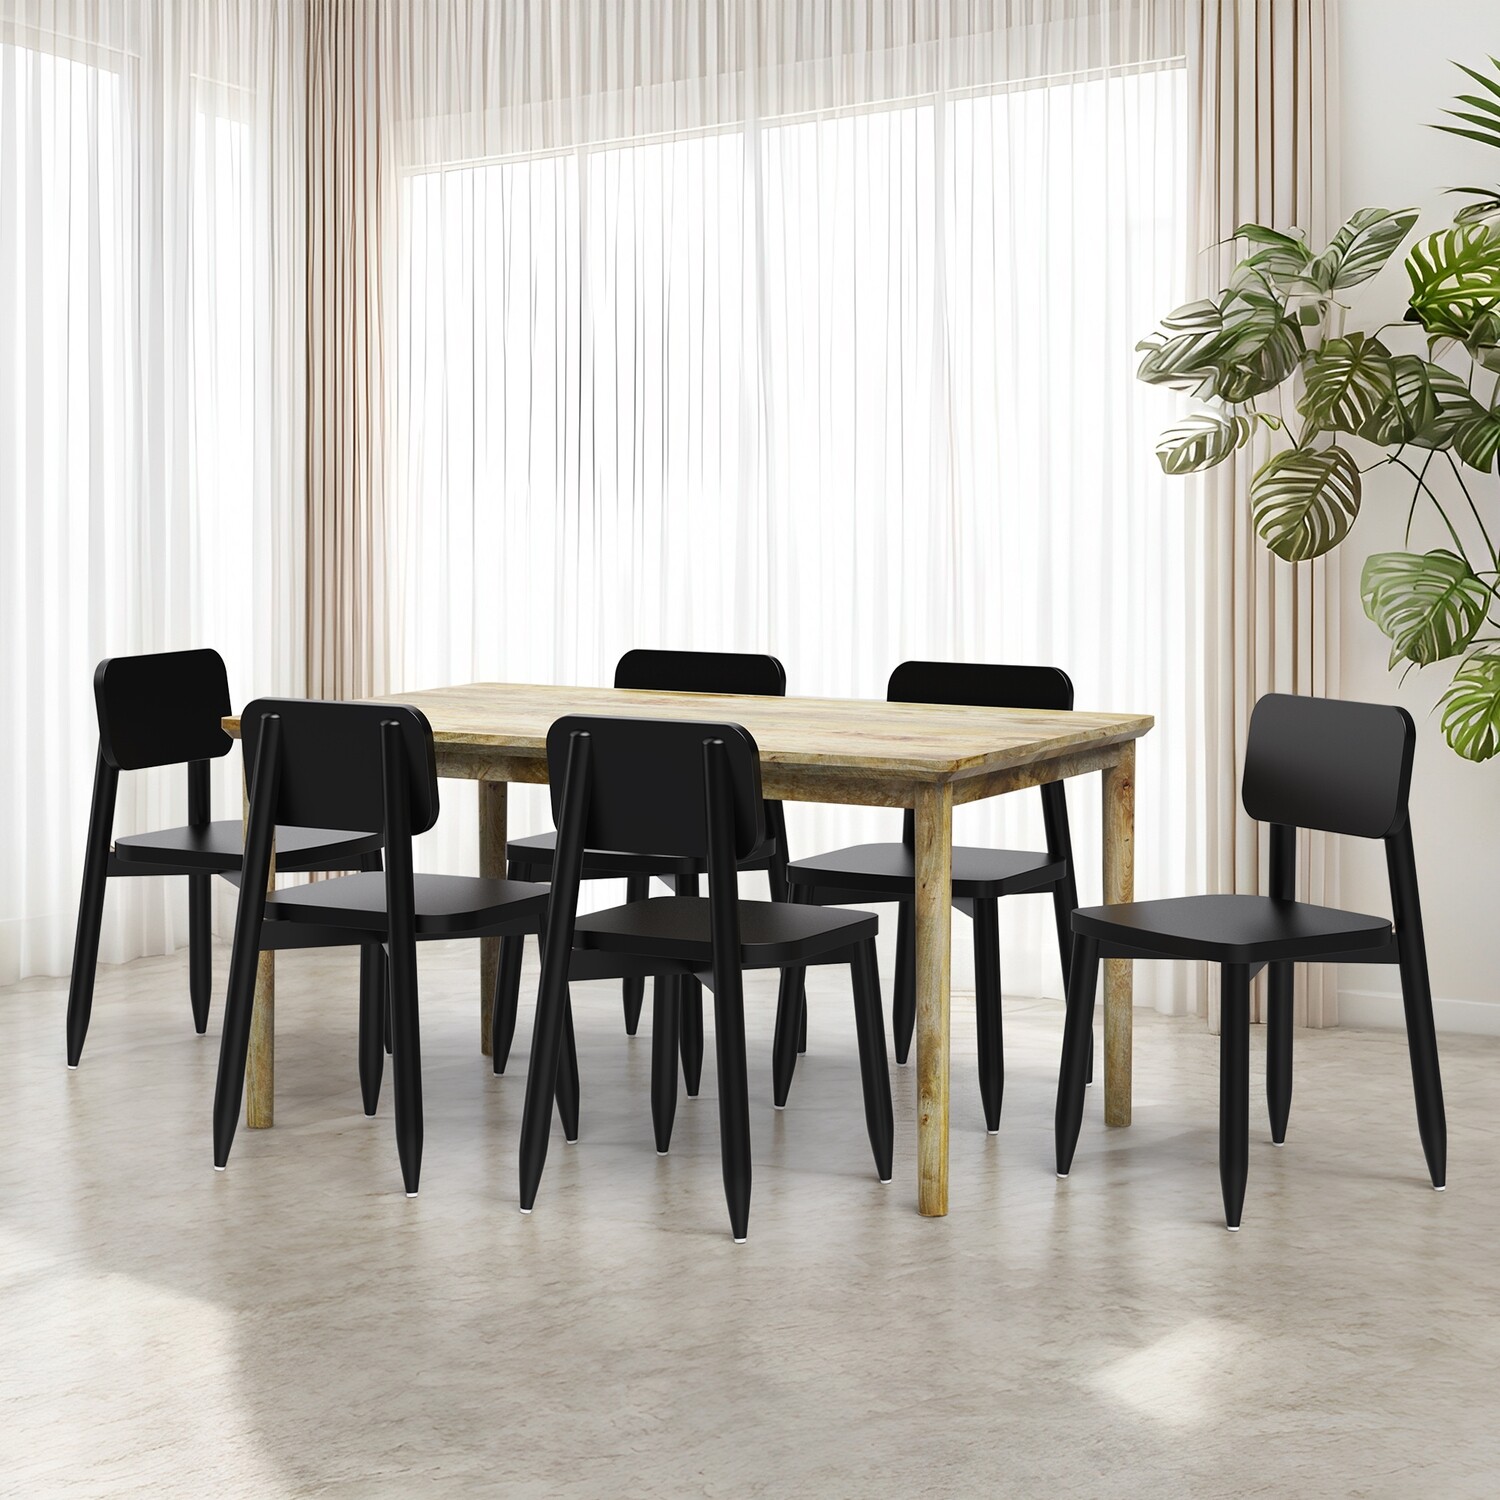 Susan-Stig Dining Table Set - 4 & 6 Seater/ All sizes